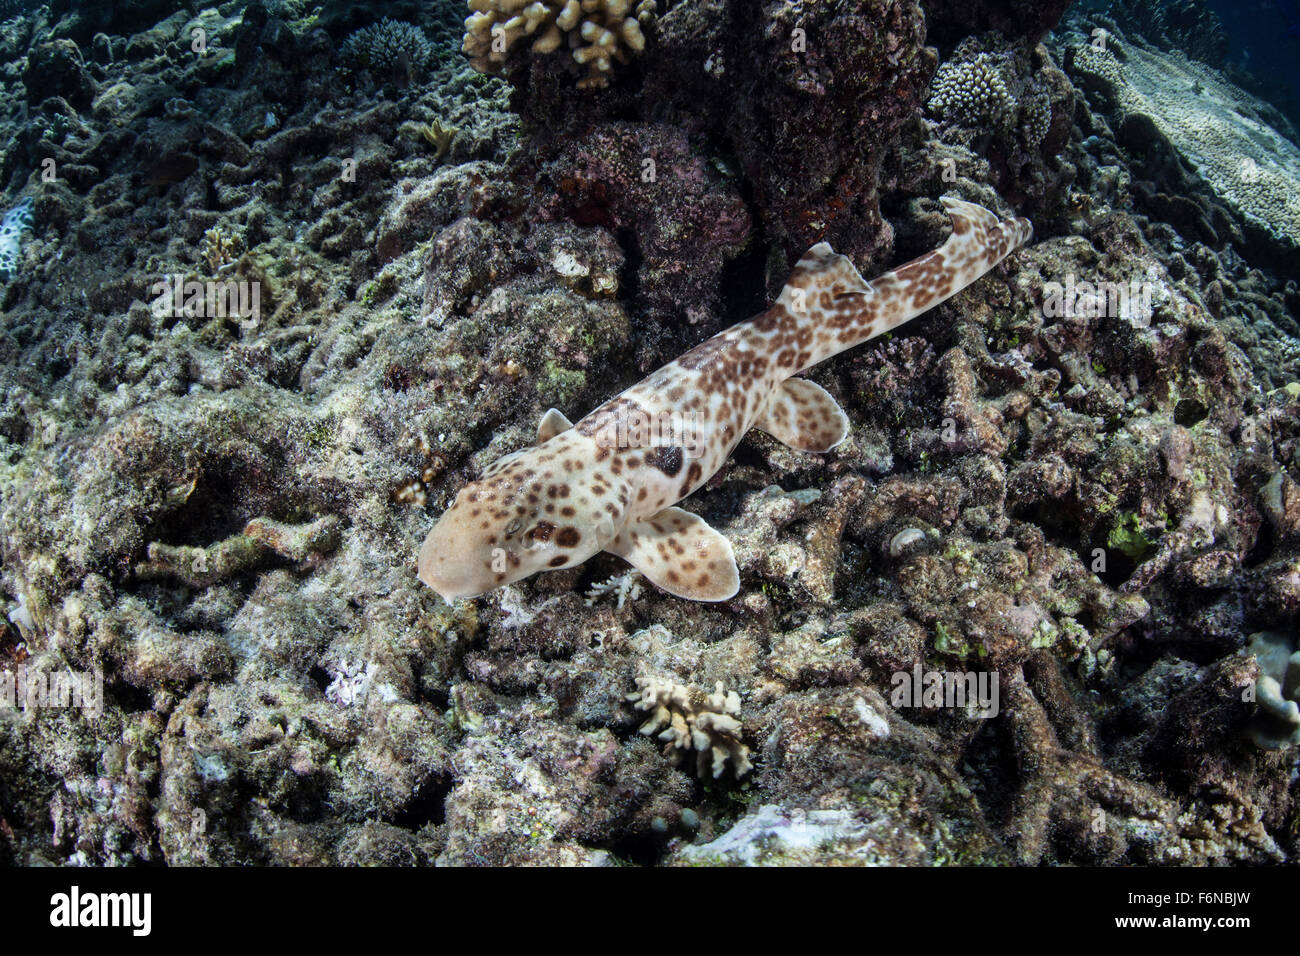 An endemic  epaulette shark swims across the rubble seafloor of Raja Ampat, Indonesia. This small shark spends most of its time Stock Photo